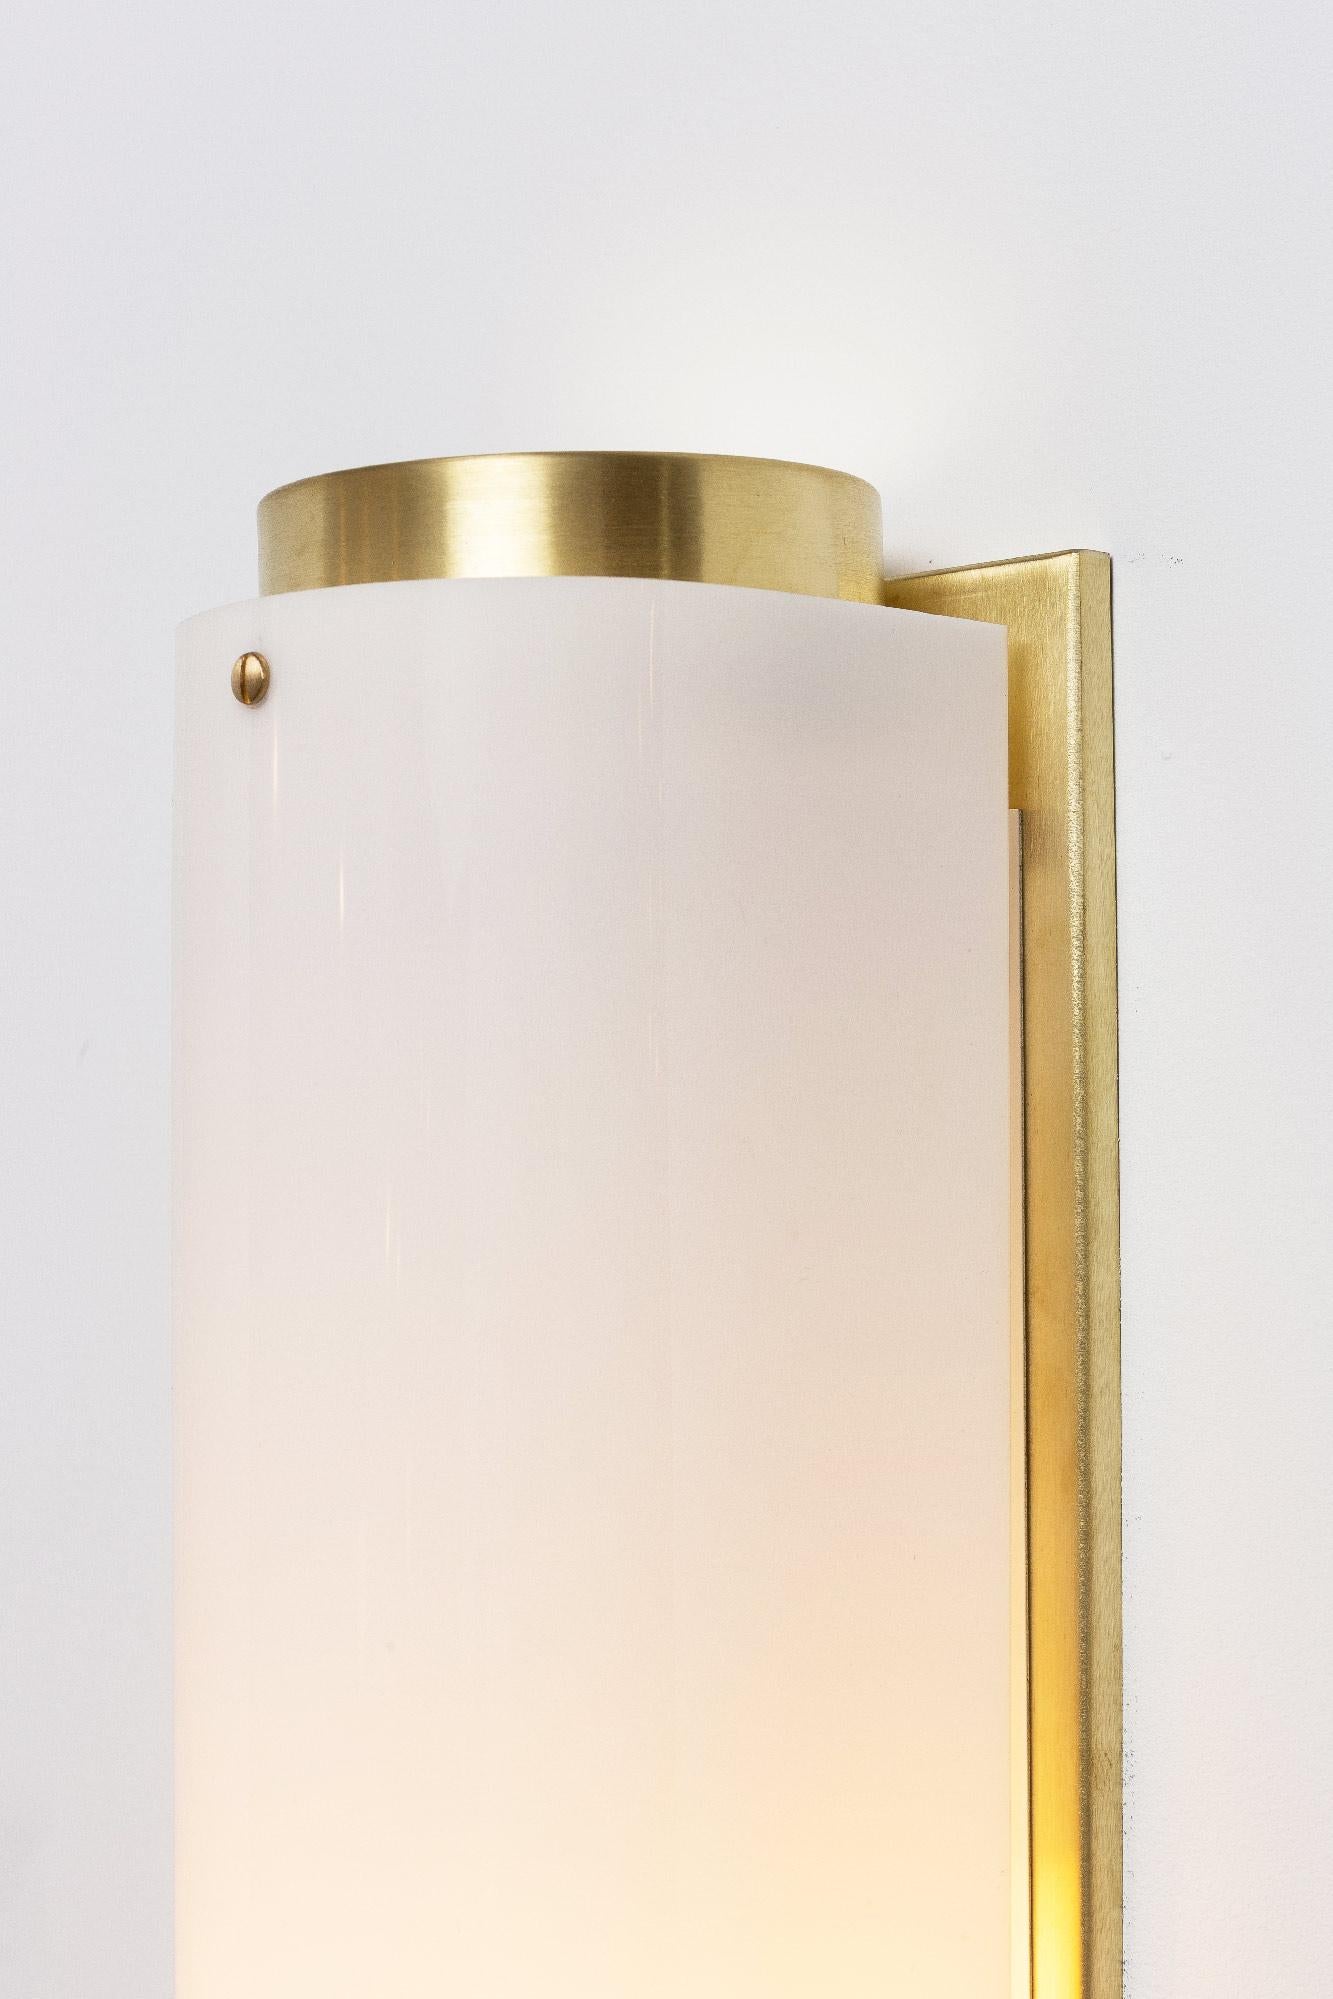 The arc sconce is made of a solid satin brass or black body and backplate with a white Lucite shade and brass screws. 

Measures: Large: W 5.25in (13.5cm) x D 5.25in (13.5cm) x H 24.5in (62cm)
Small: W 5.25in (13.5cm) x D 5.25in (13.5cm) x H 12in